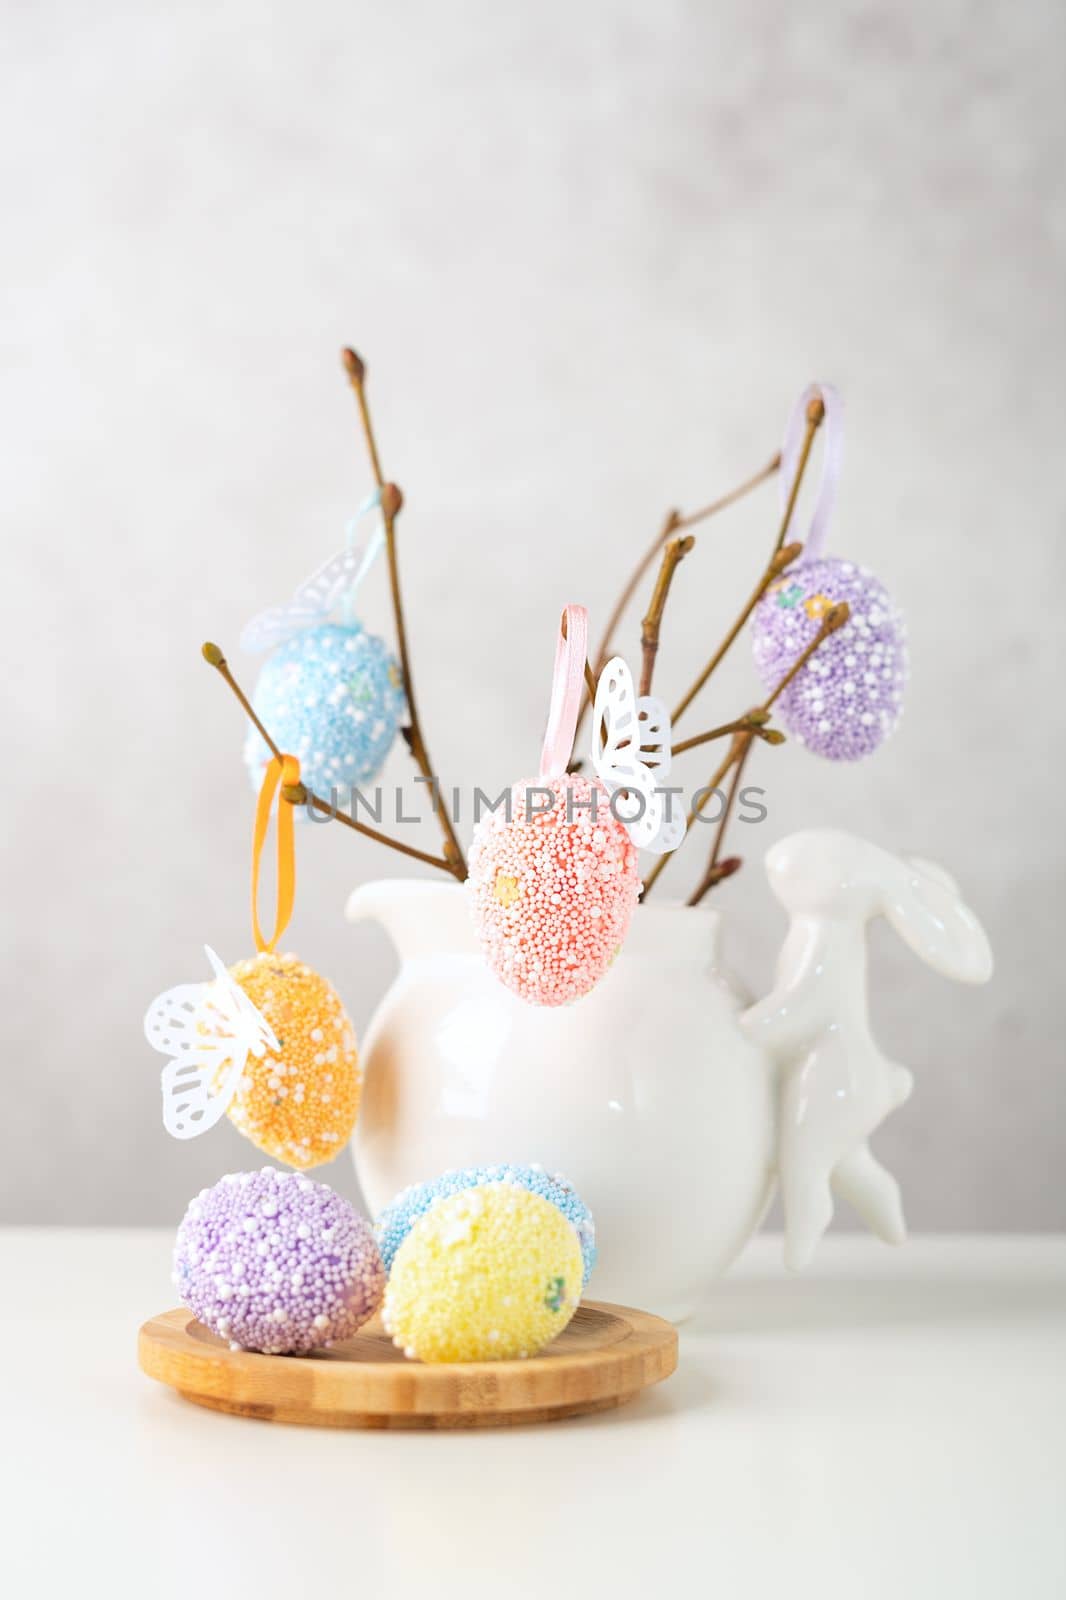 Home interior with easter decor. Vase with willow tree branches with Easter eggs and bunny on white table and background with copy space by Ostanina